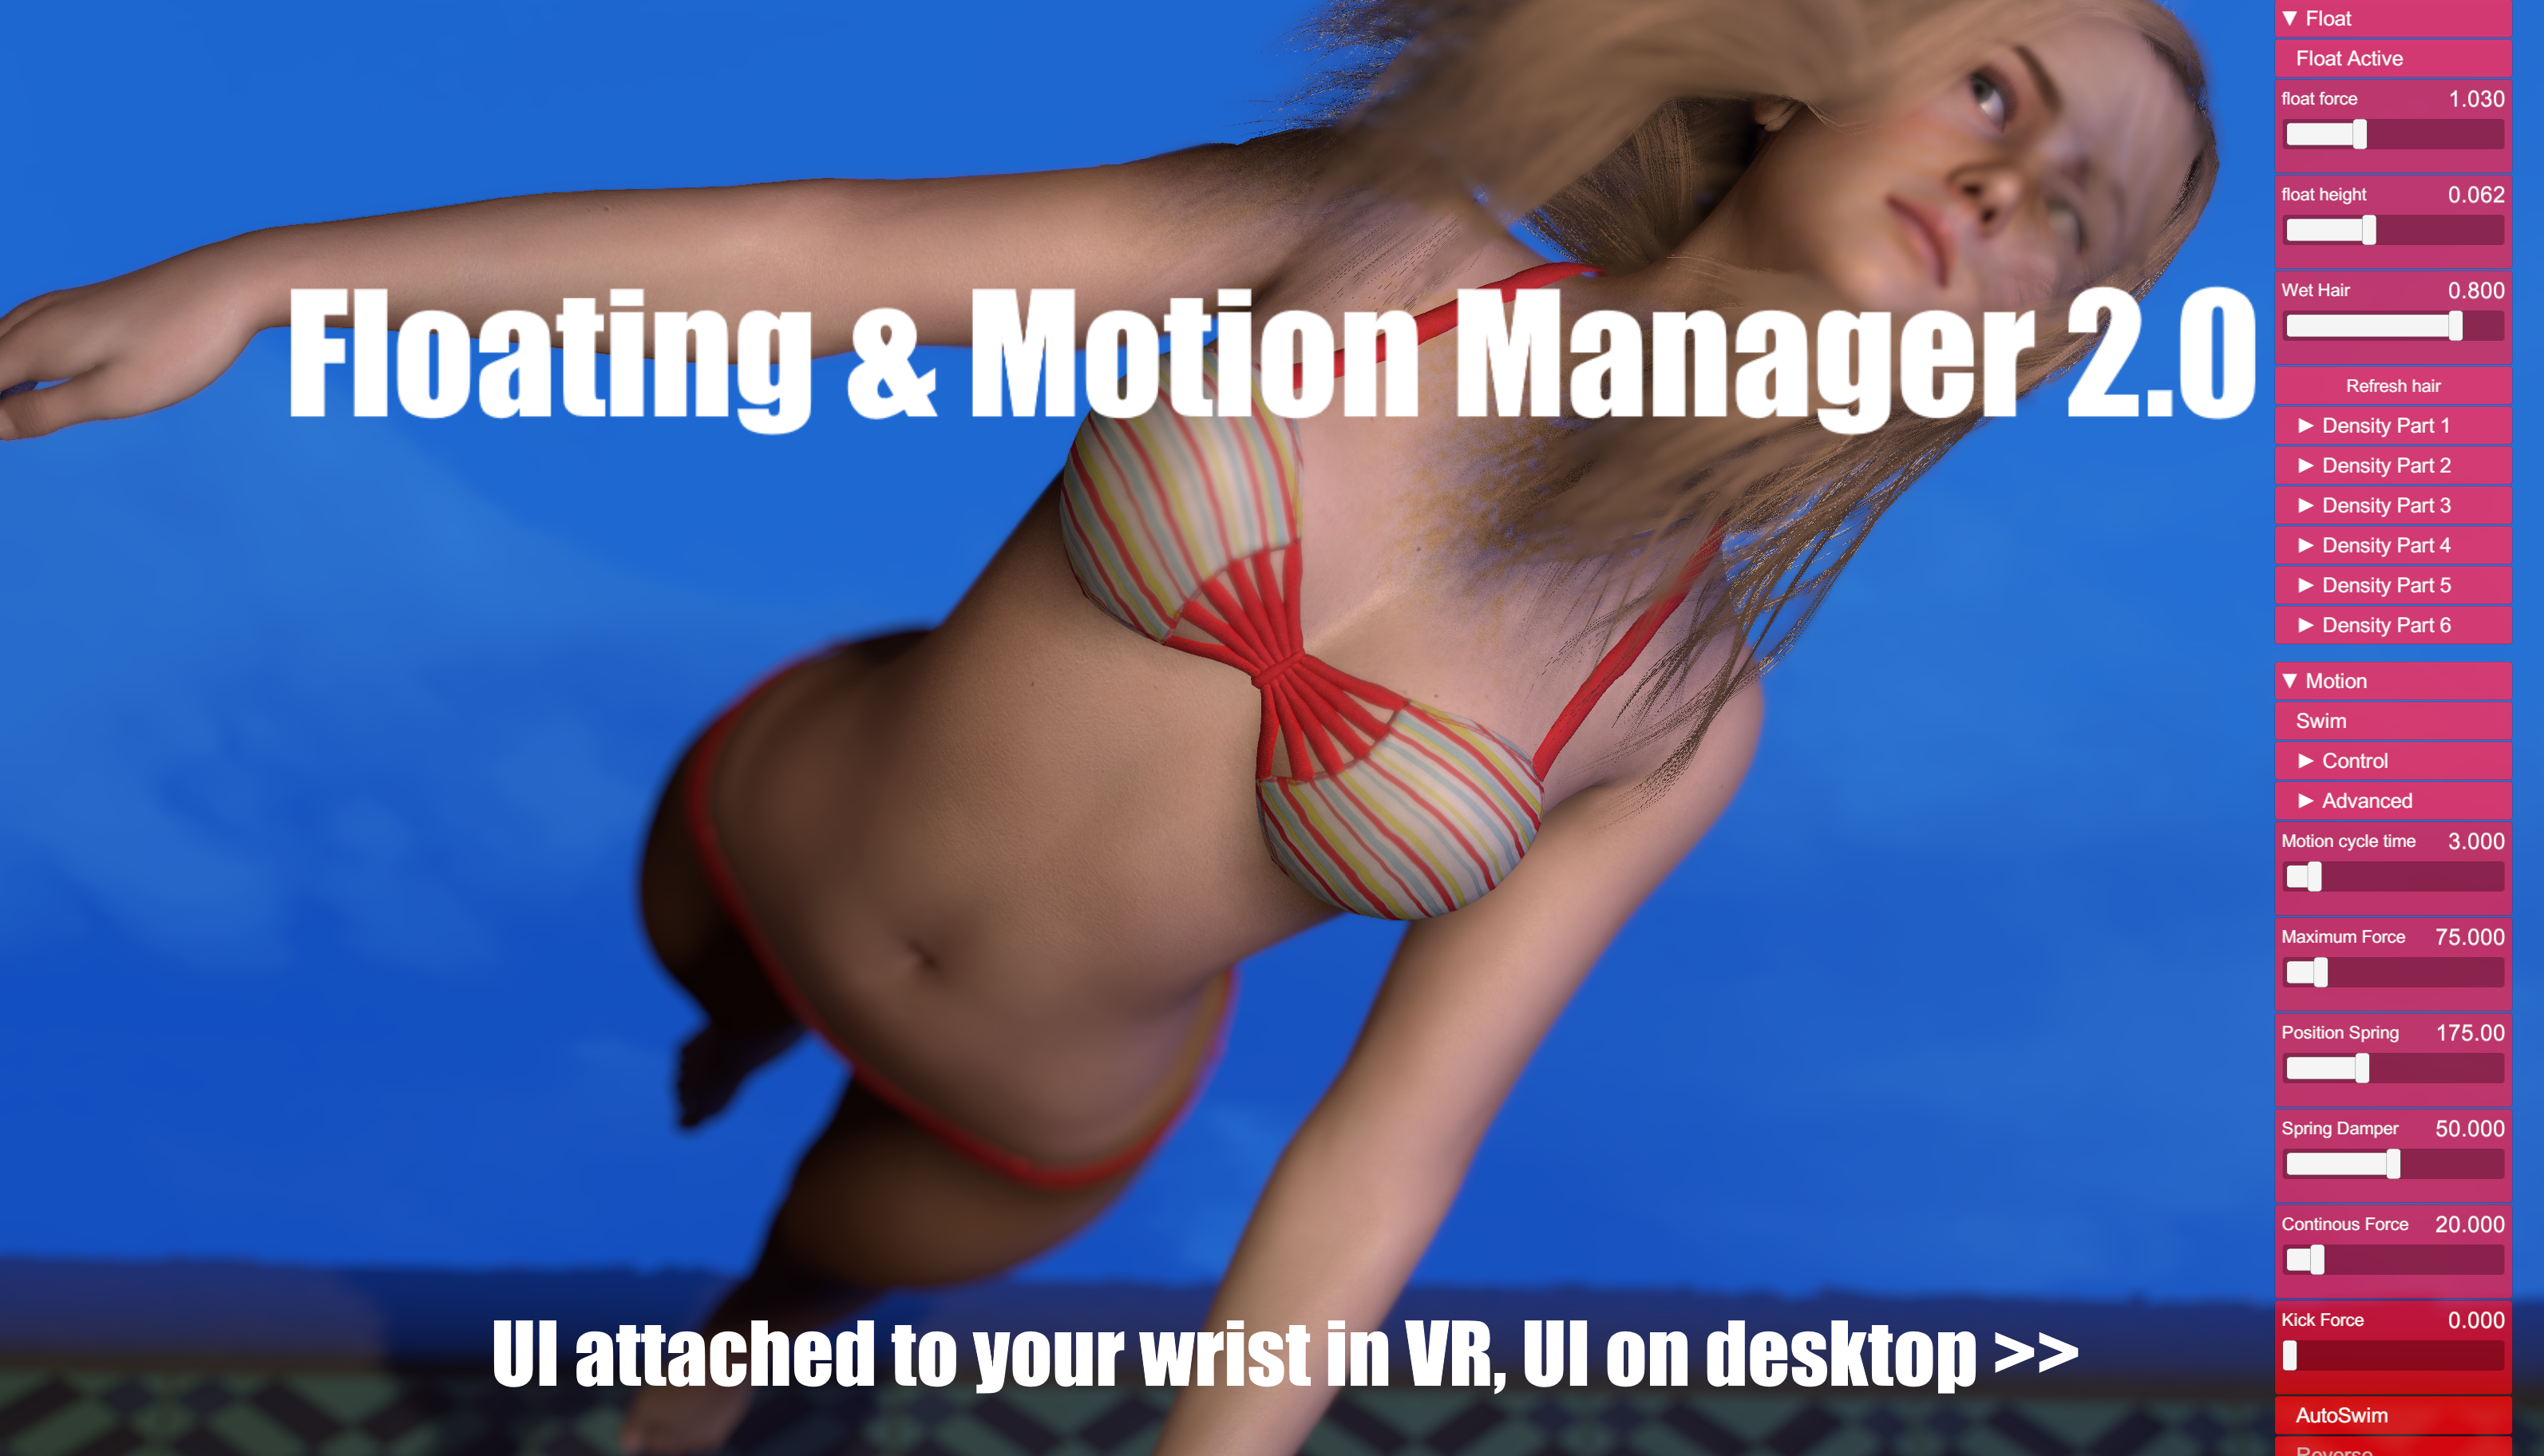 float-motionmanager-2.0.png